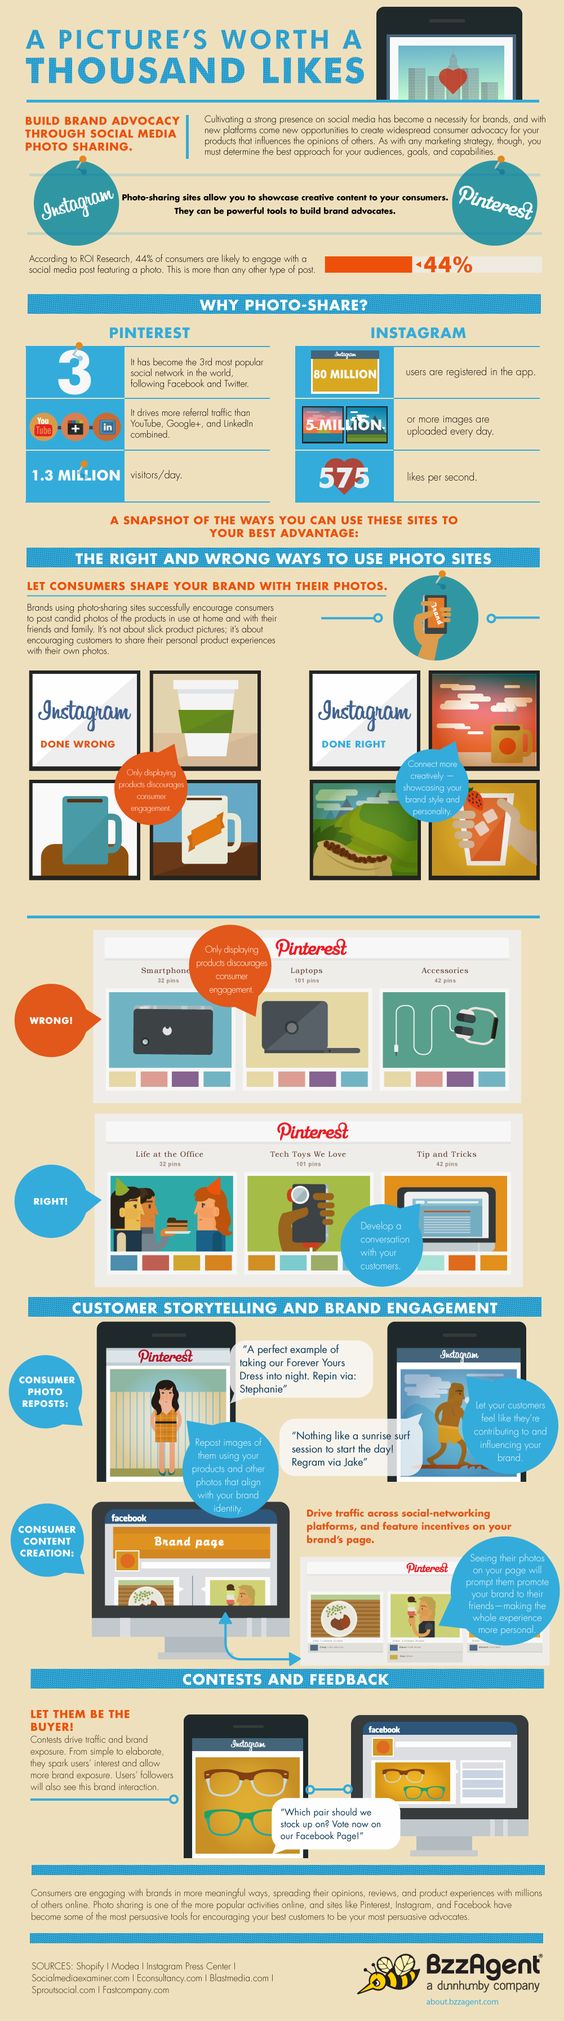 Discover the power of visual marketing, & how Pictures Can Help Your Brand #infographic